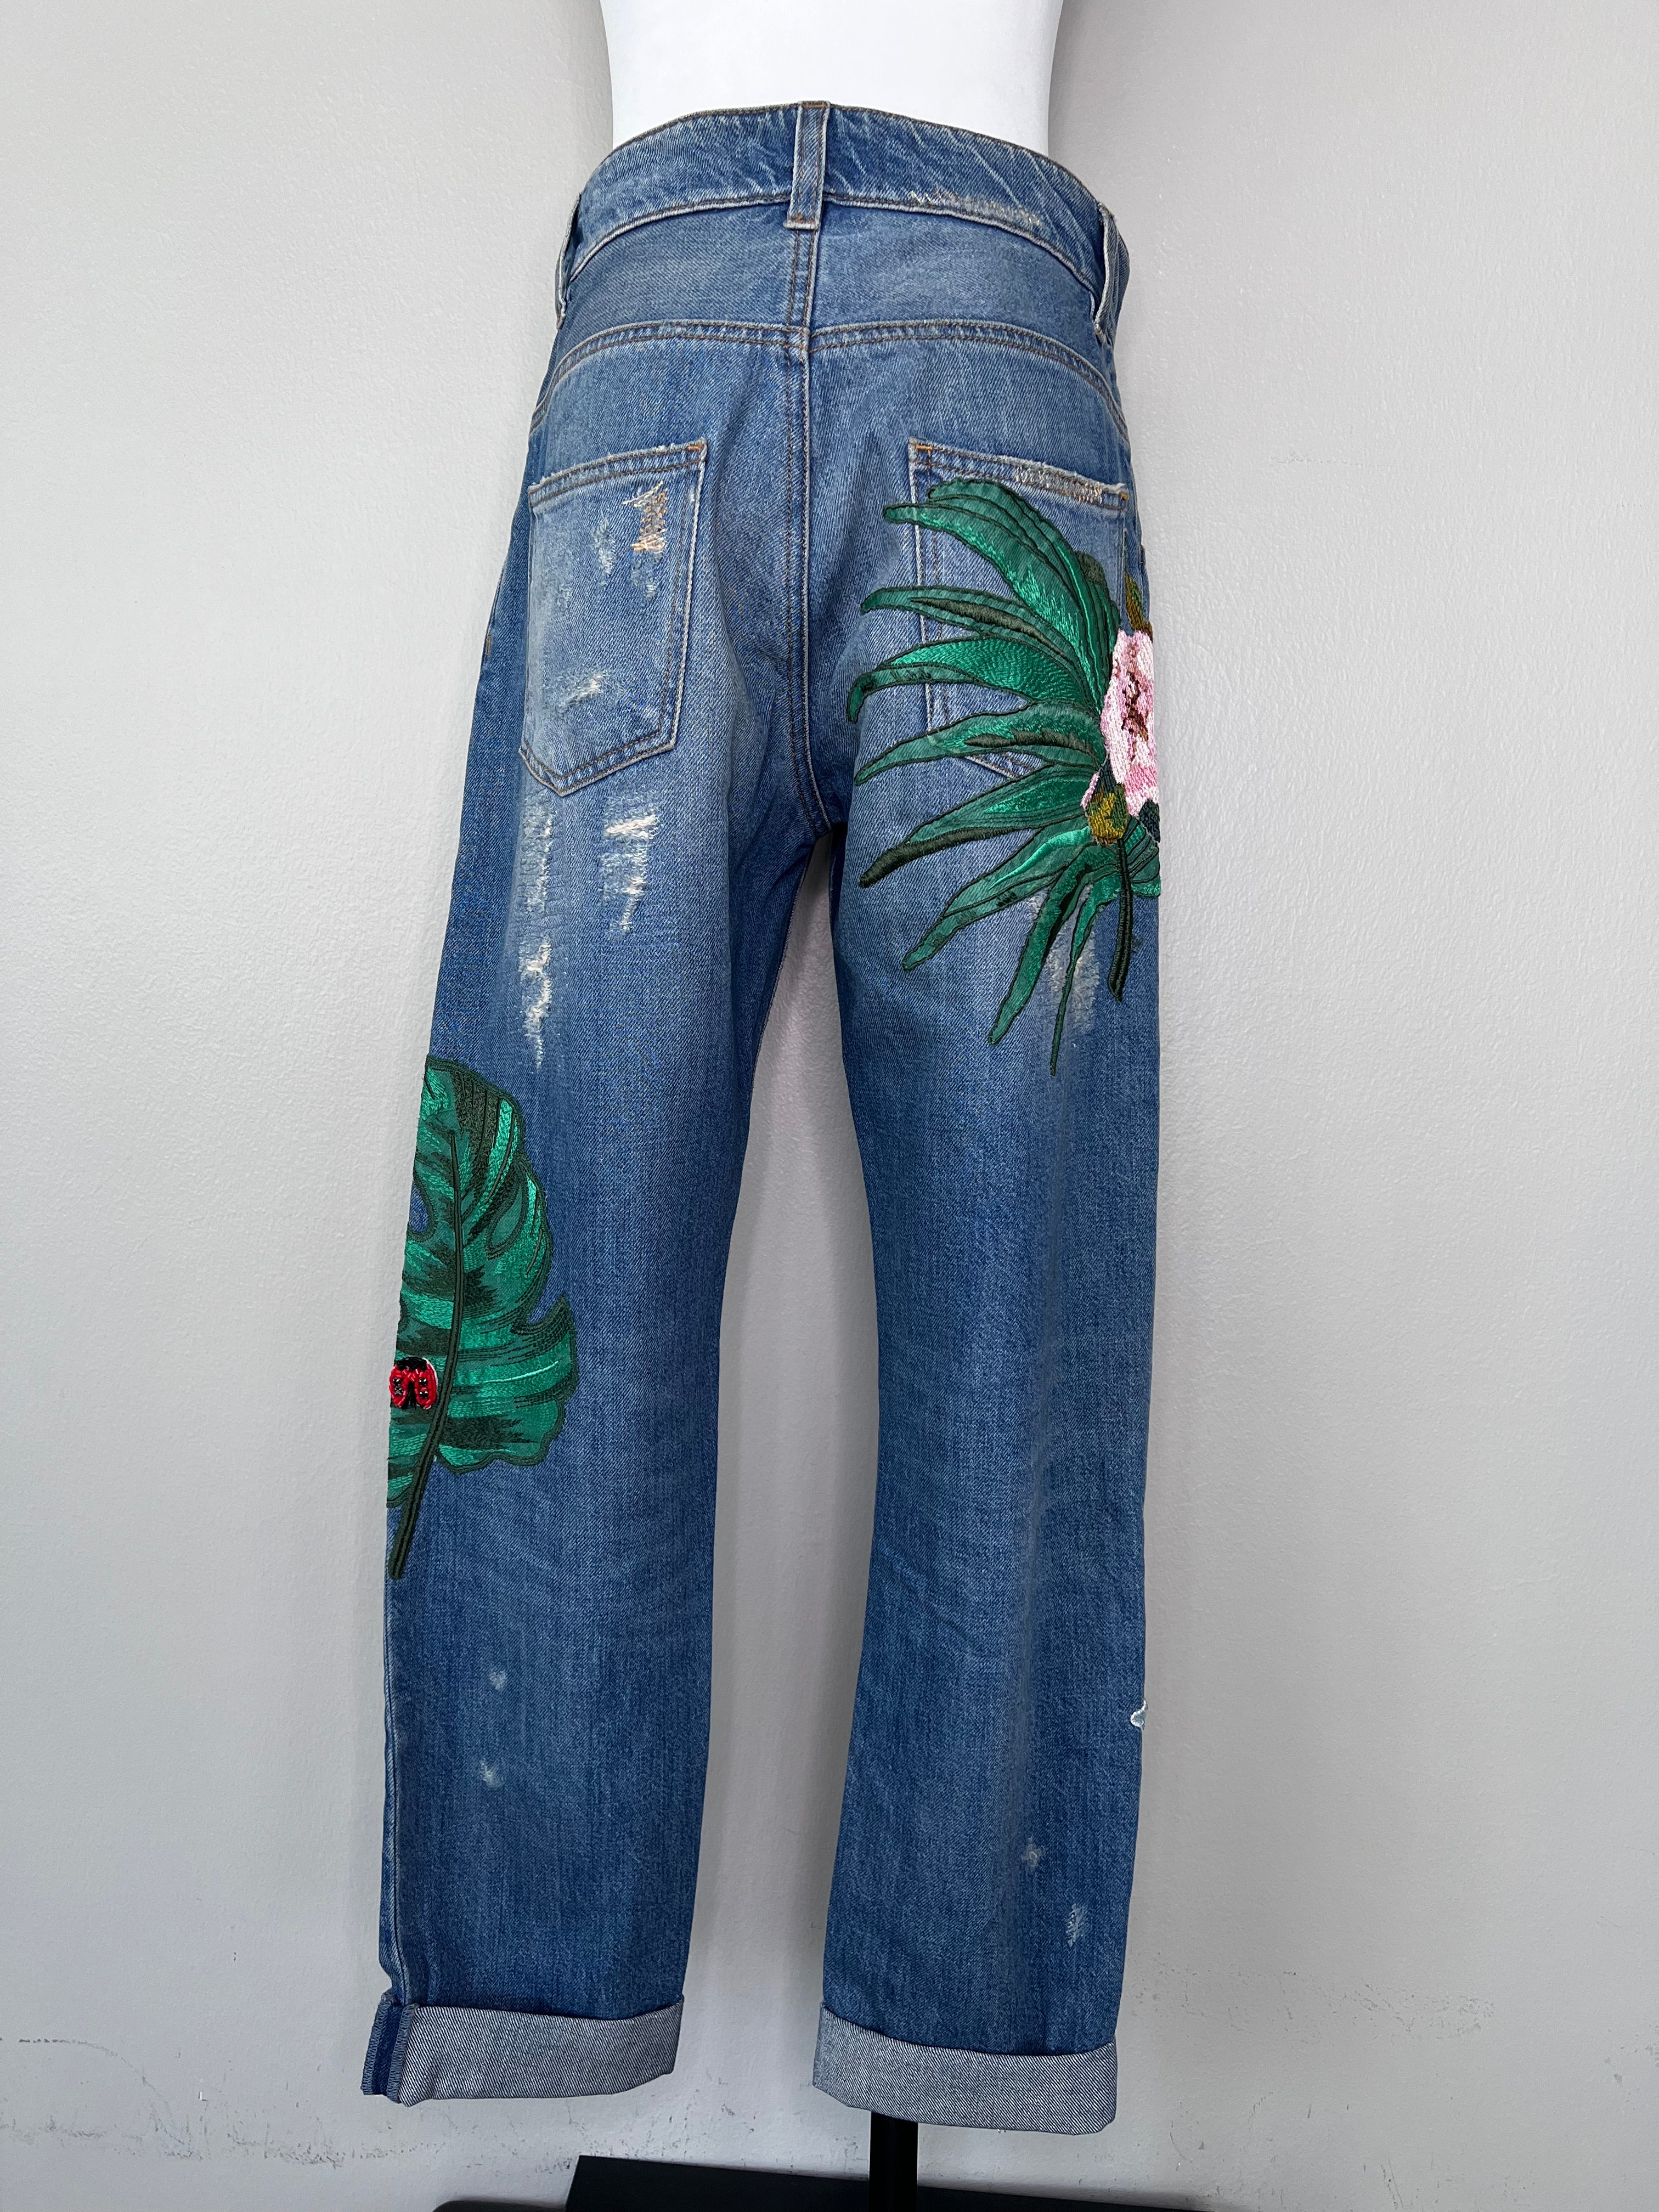 Blue patchwork design jeans with ripped knees - DOLCE & GABBANA